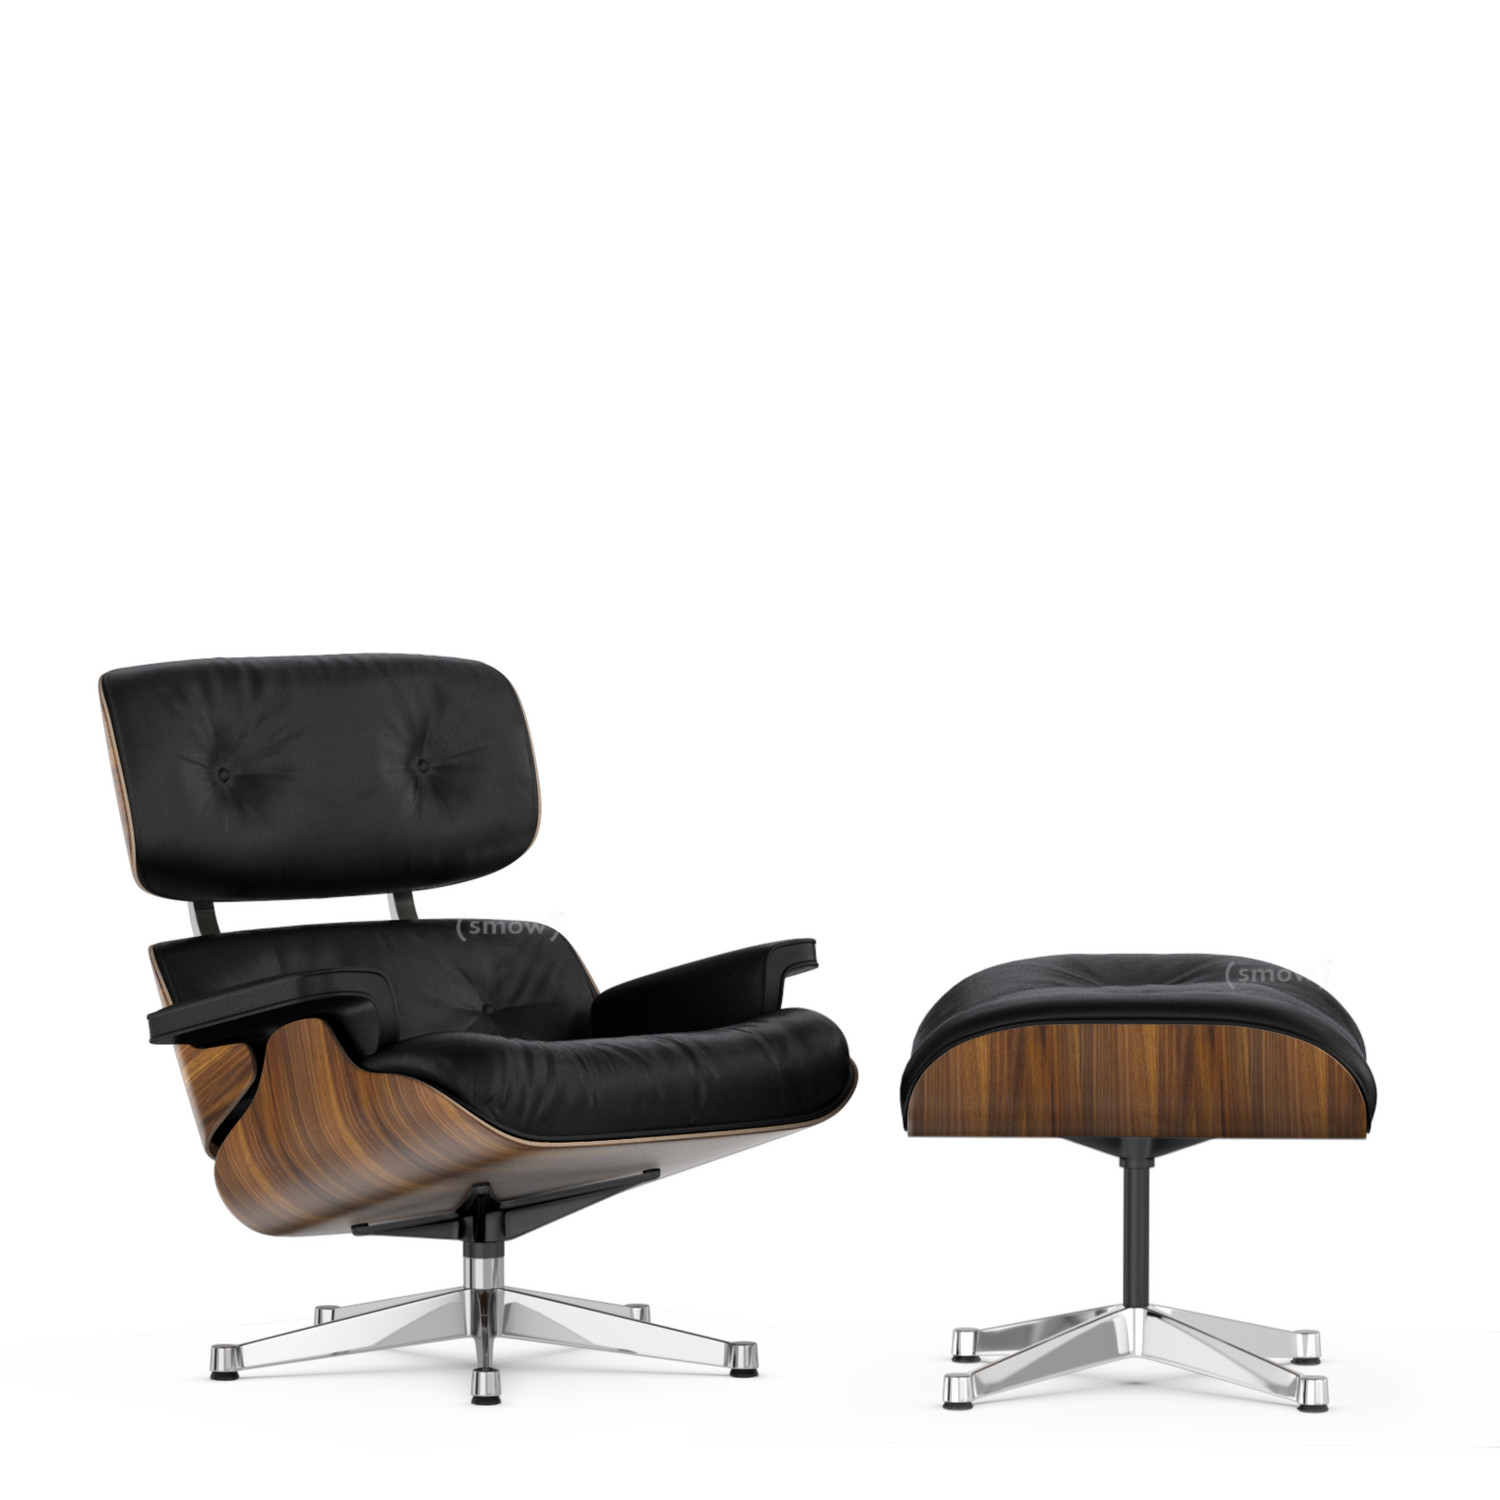 Vitra Lounge Chair Ottoman By Charles Ray Eames